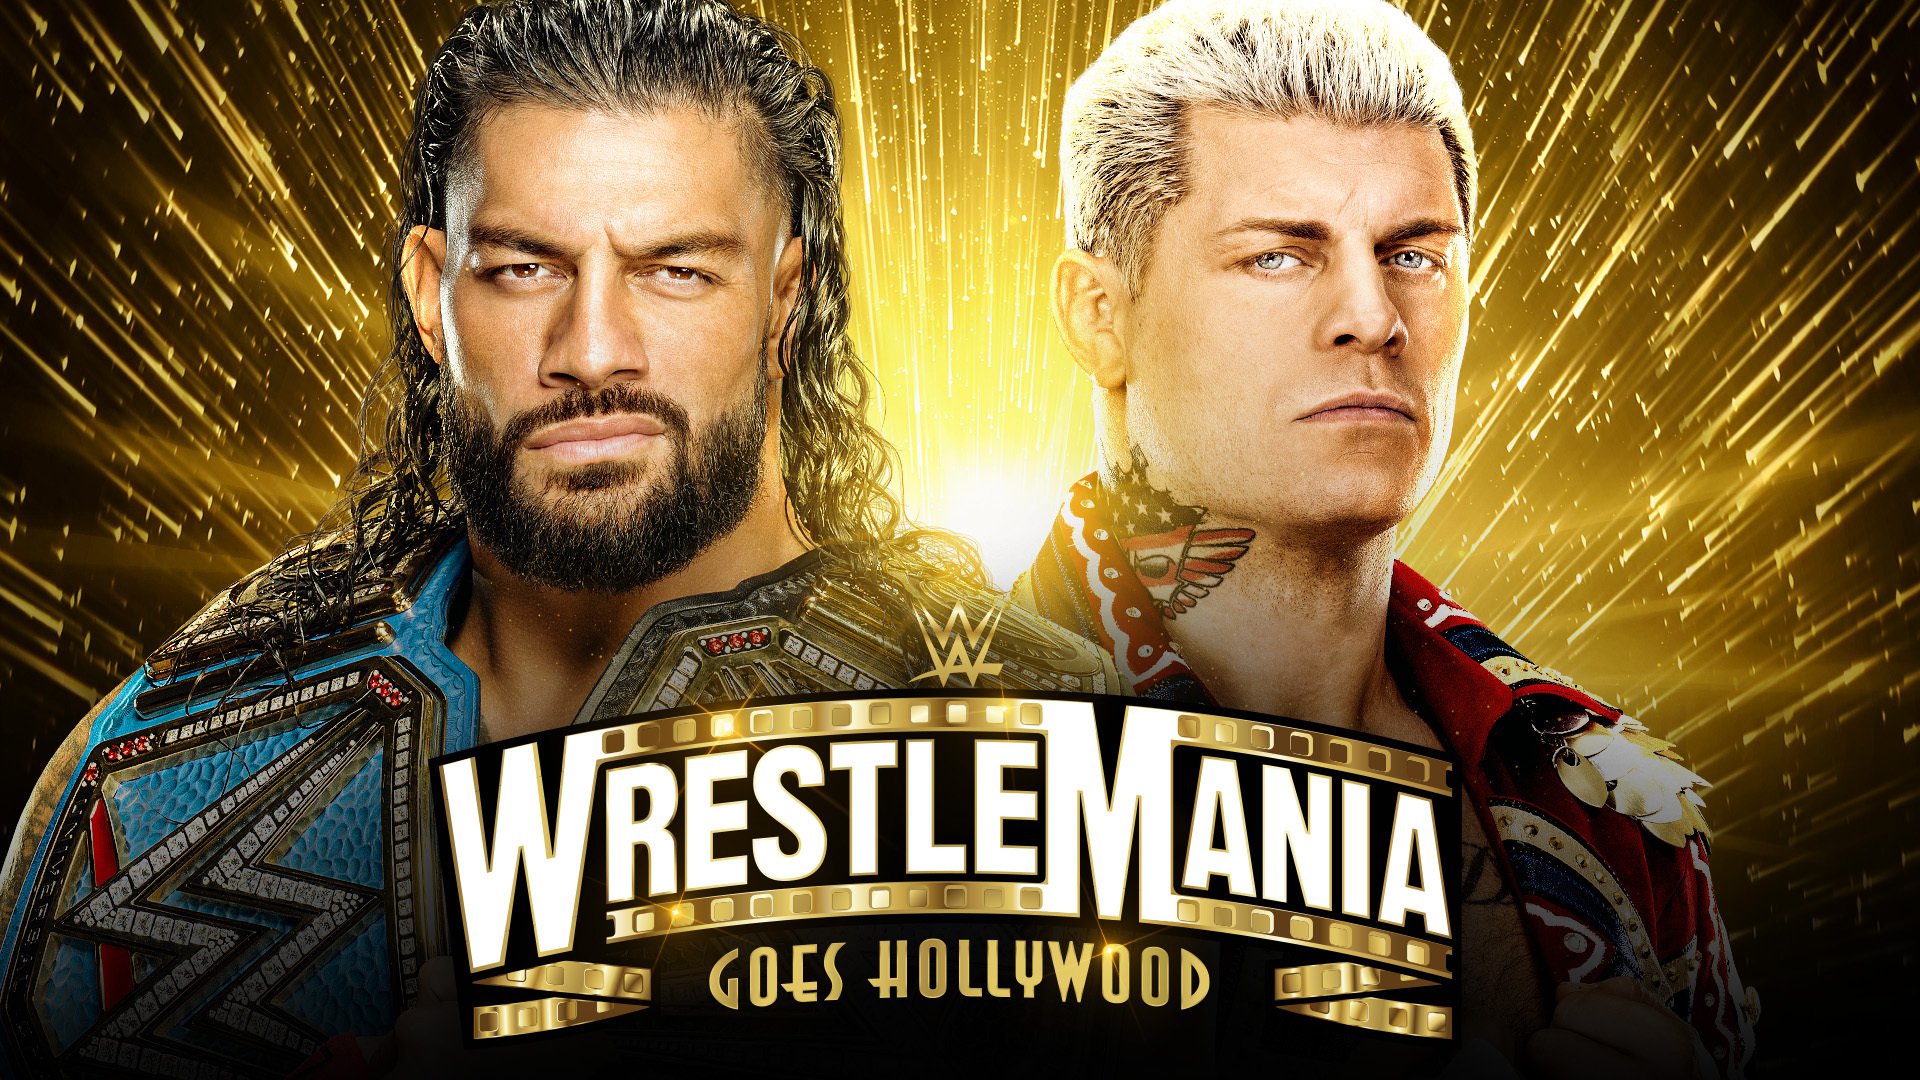 WWE: How much are tickets for Wrestlemania 39 and why is it a two